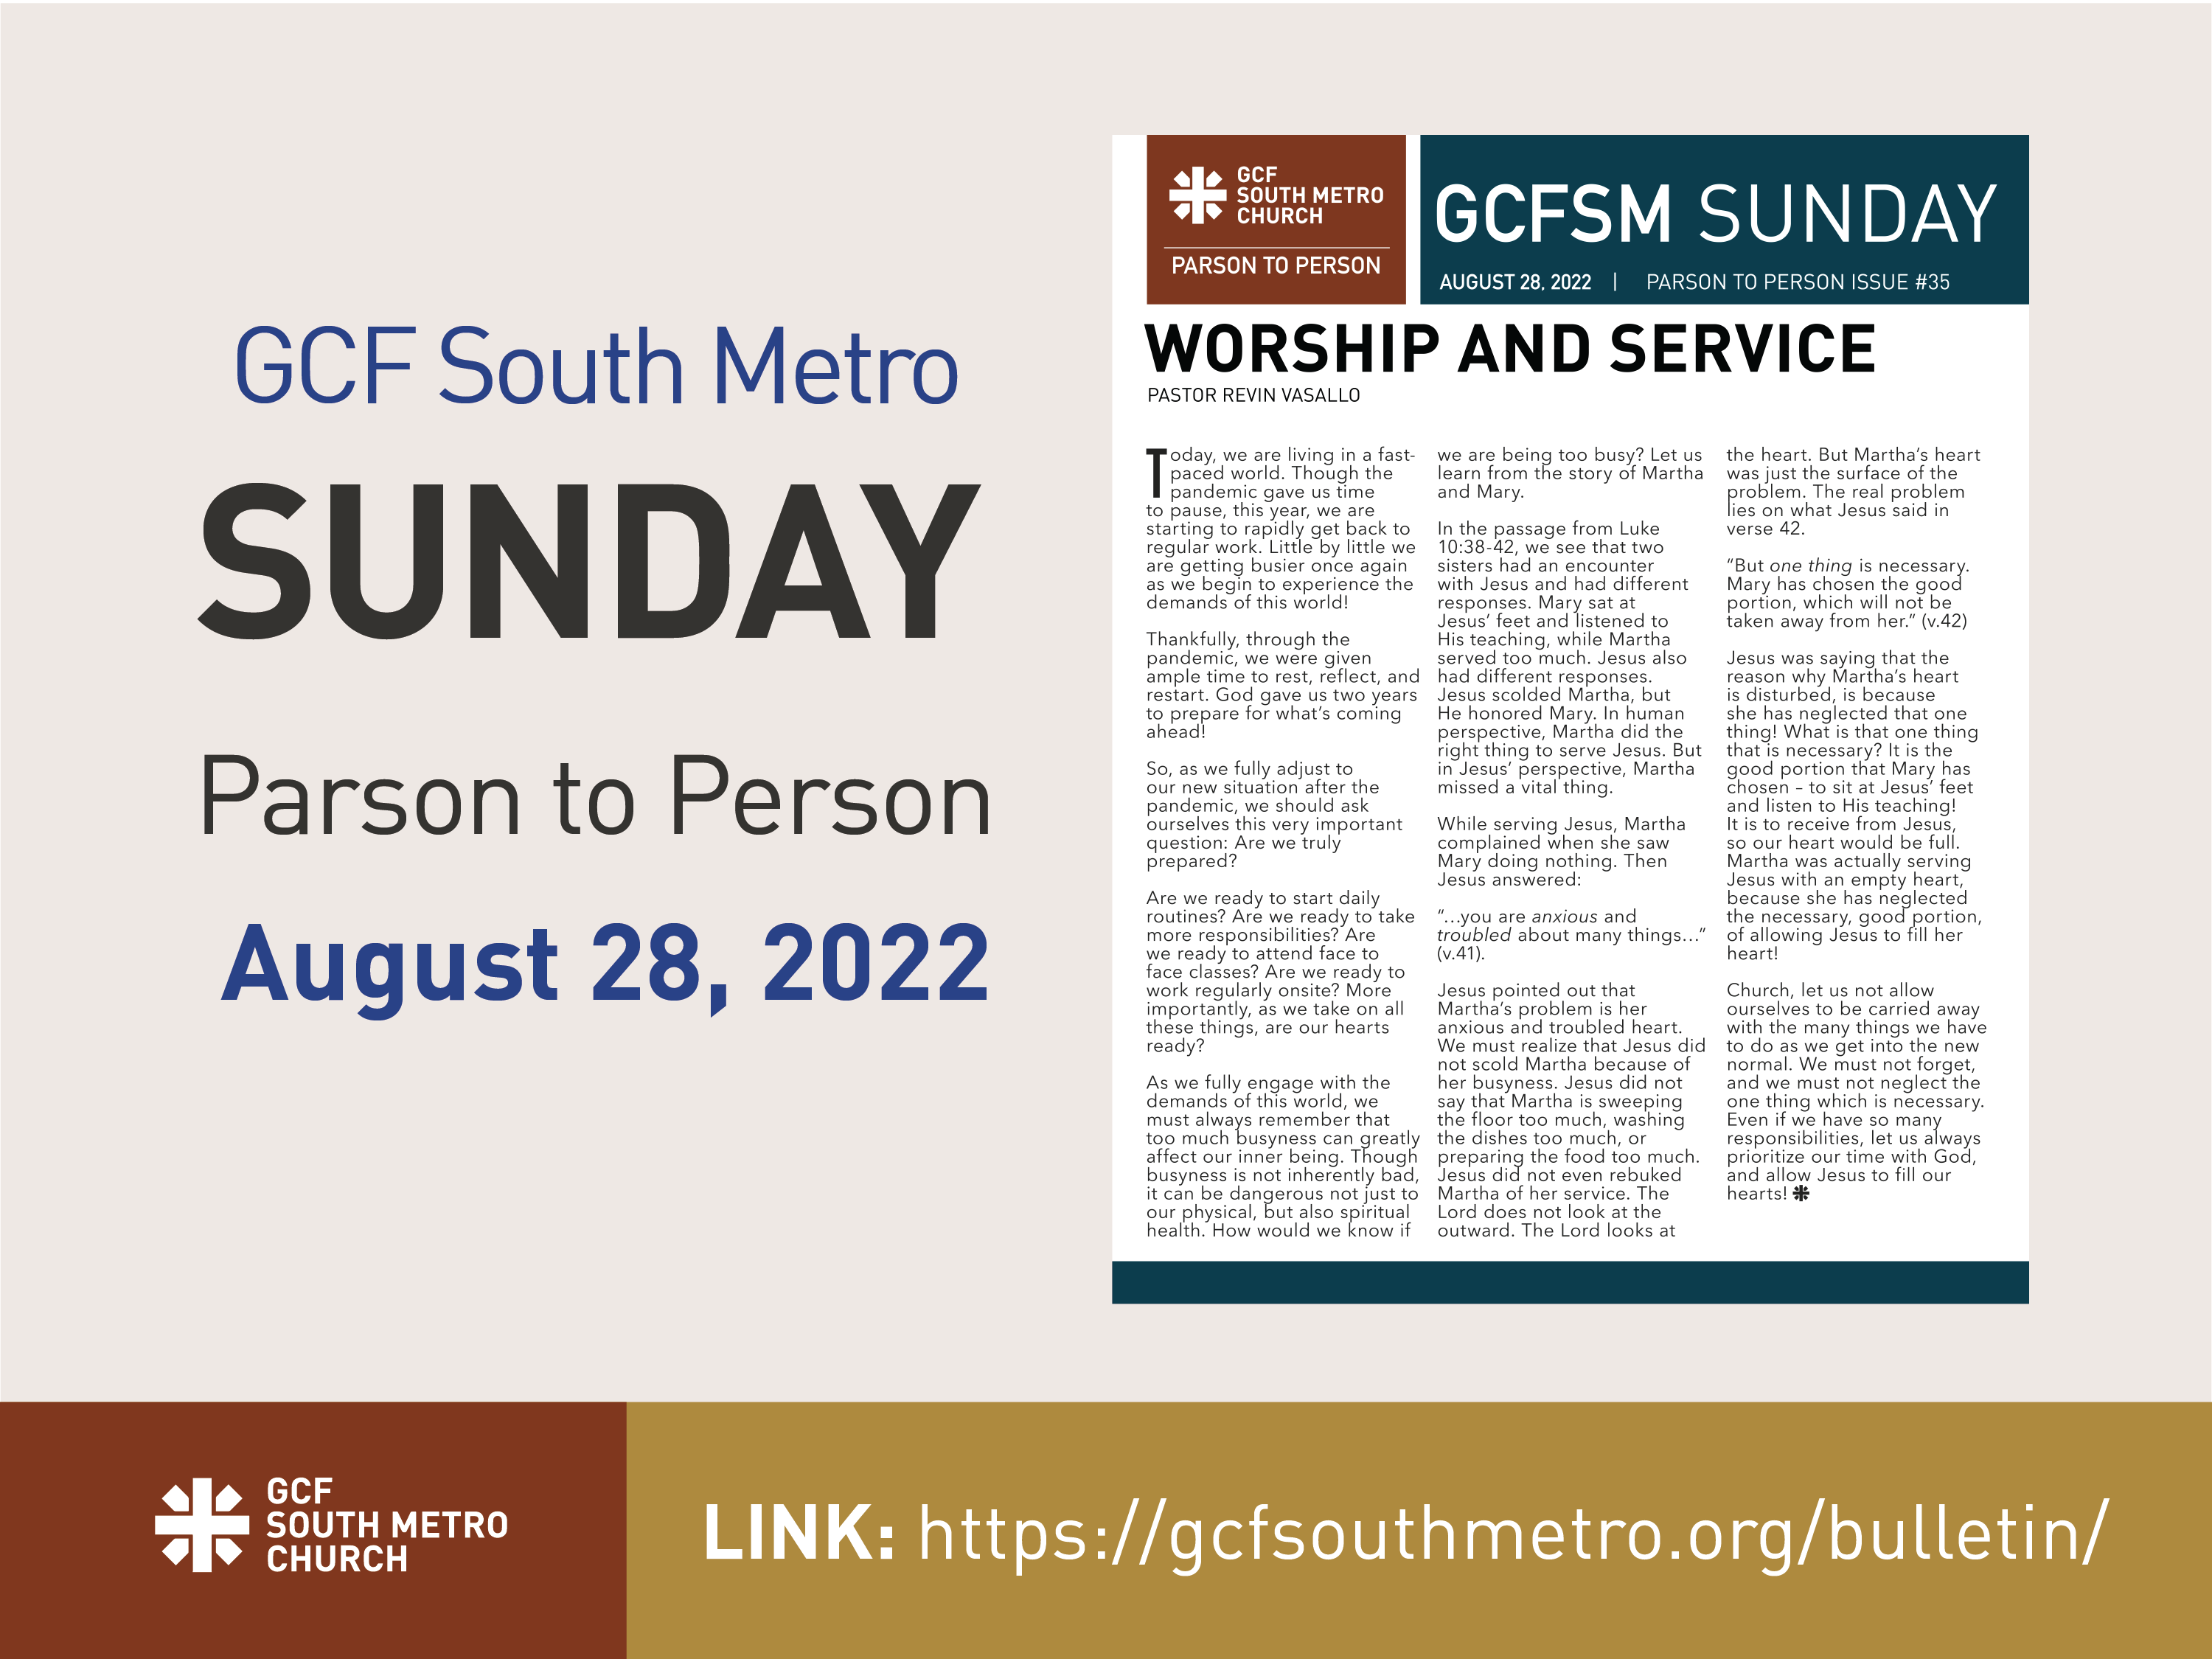 Sunday Bulletin – Parson to Person, August 28, 2022